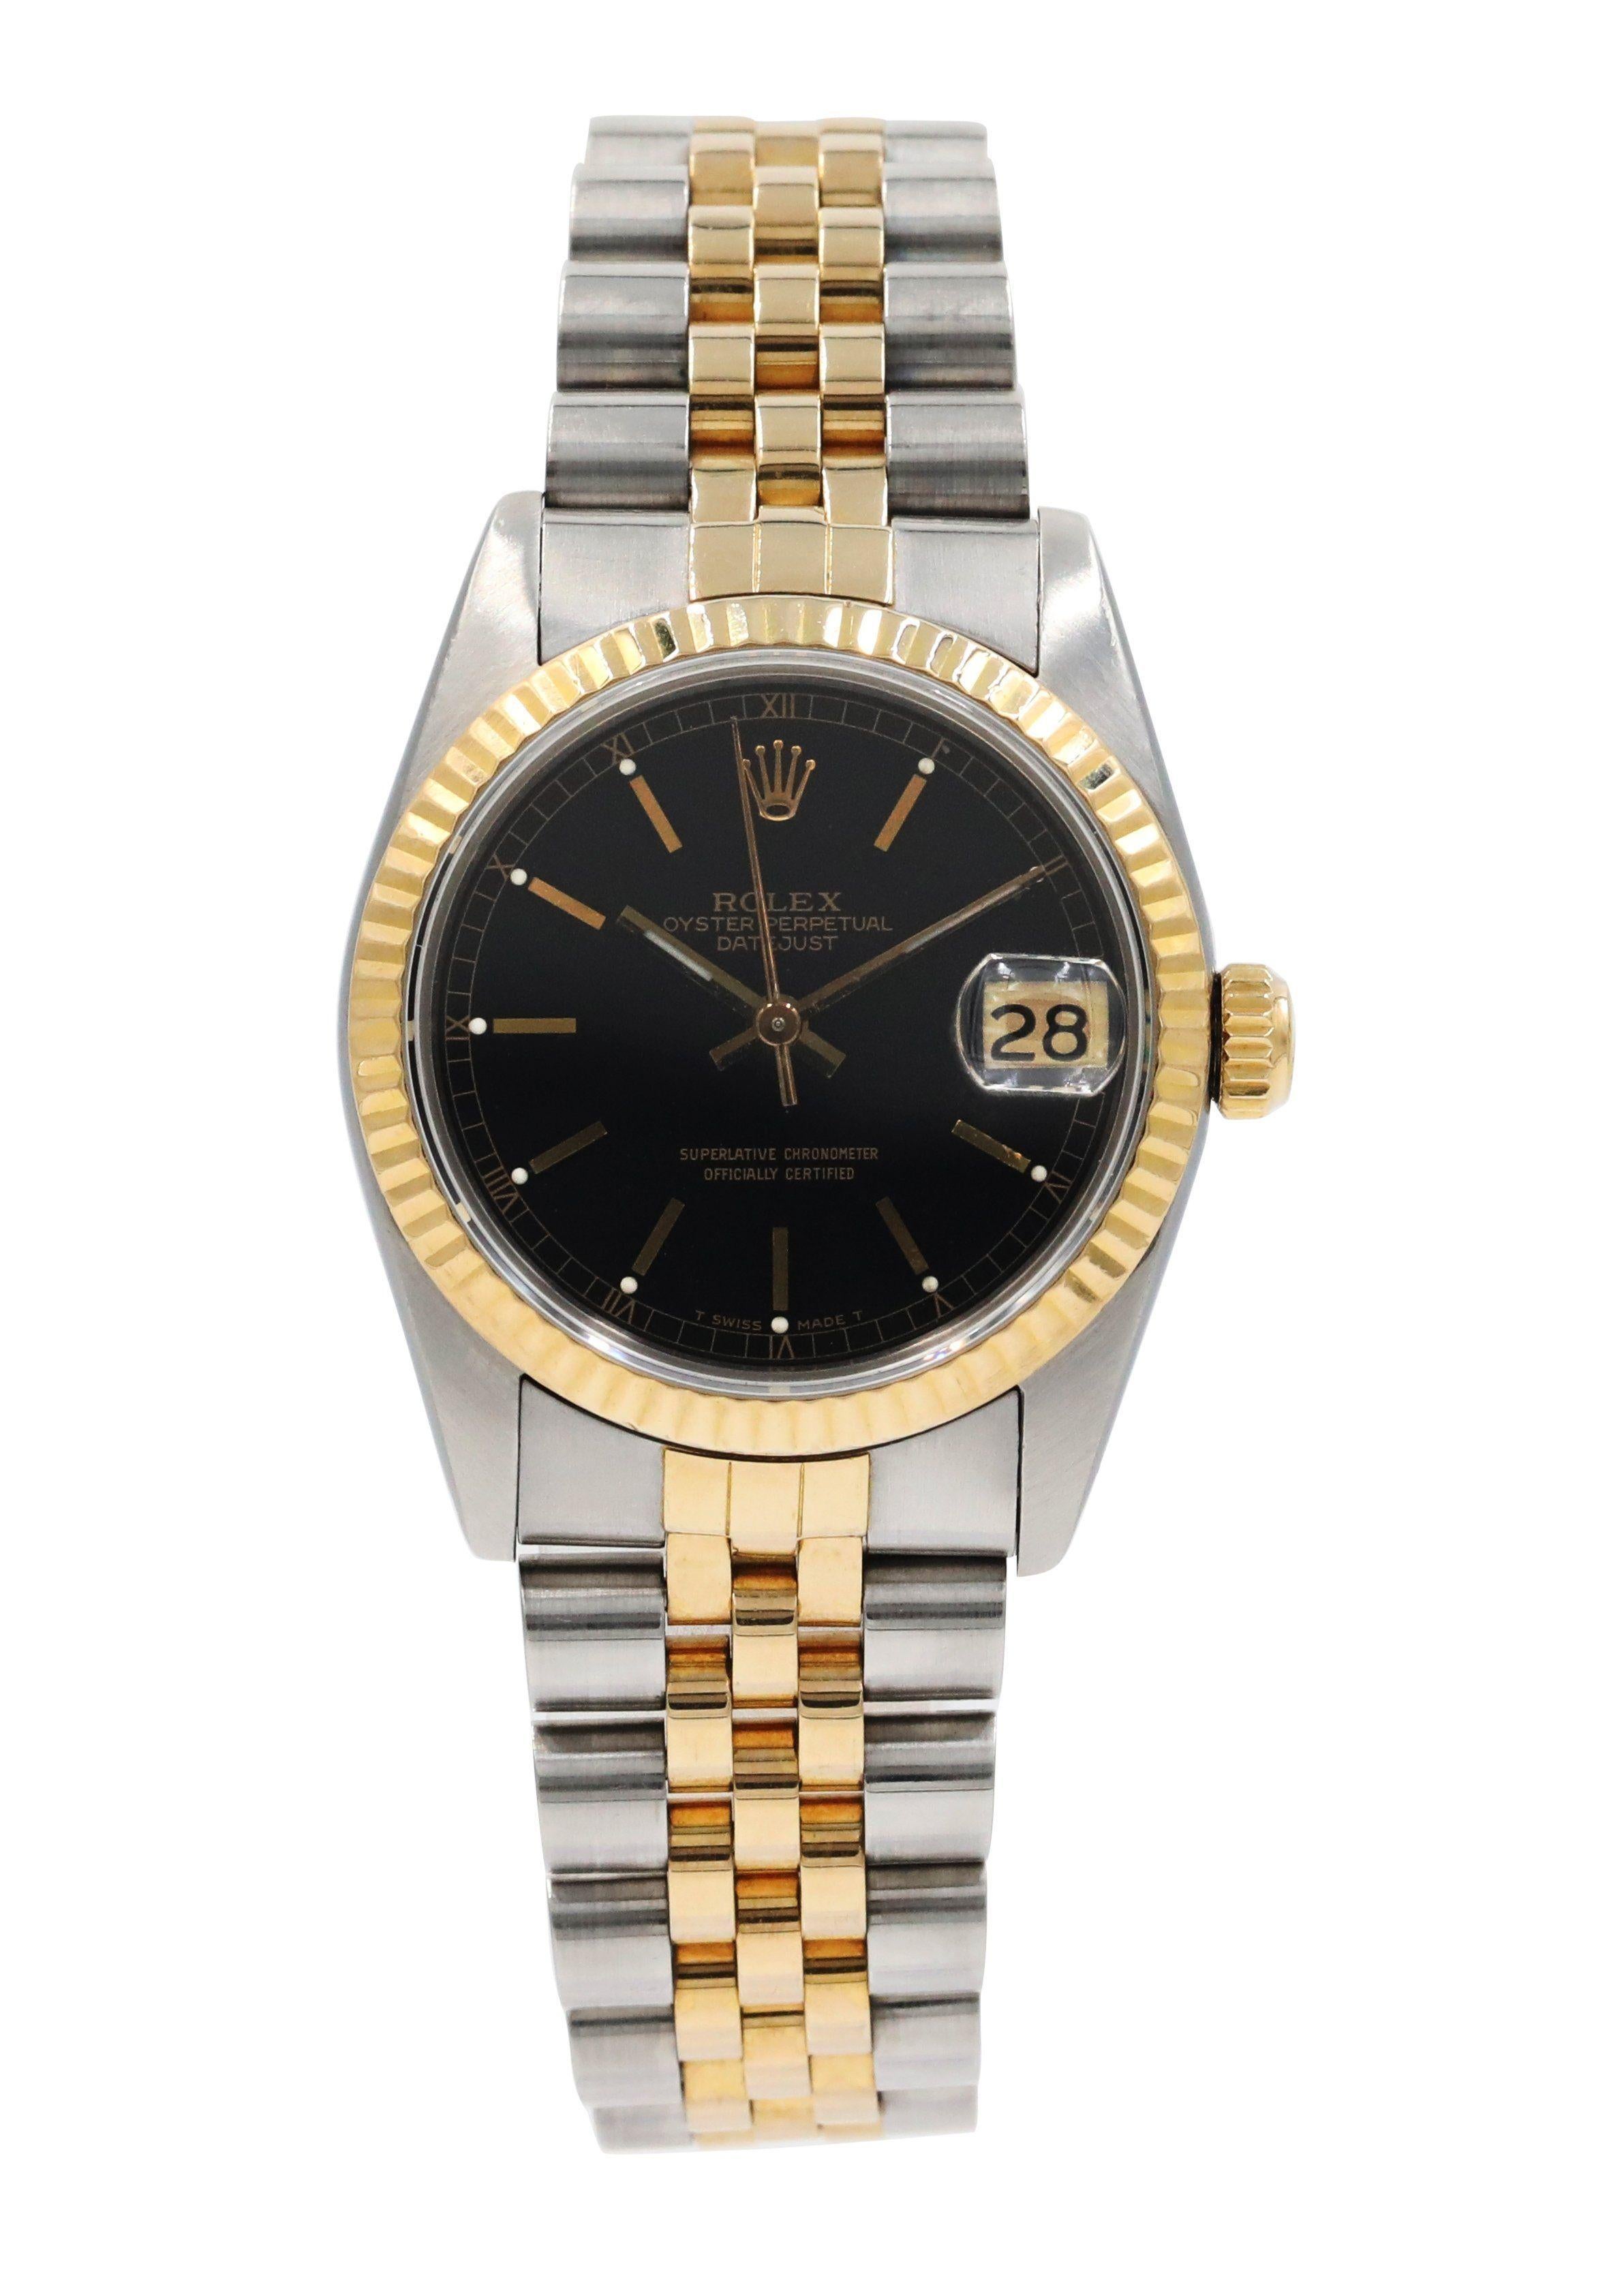 Rolex Datejust 68273 Ladies Watch.
31mm Stainless Steel case. 
Yellow Gold Stationary bezel. 
Black dial with Luminous Steel hands and index hour markers. 
Minute markers on the outer dial. 
Date display at the 3 o'clock position. 
Stainless Steel